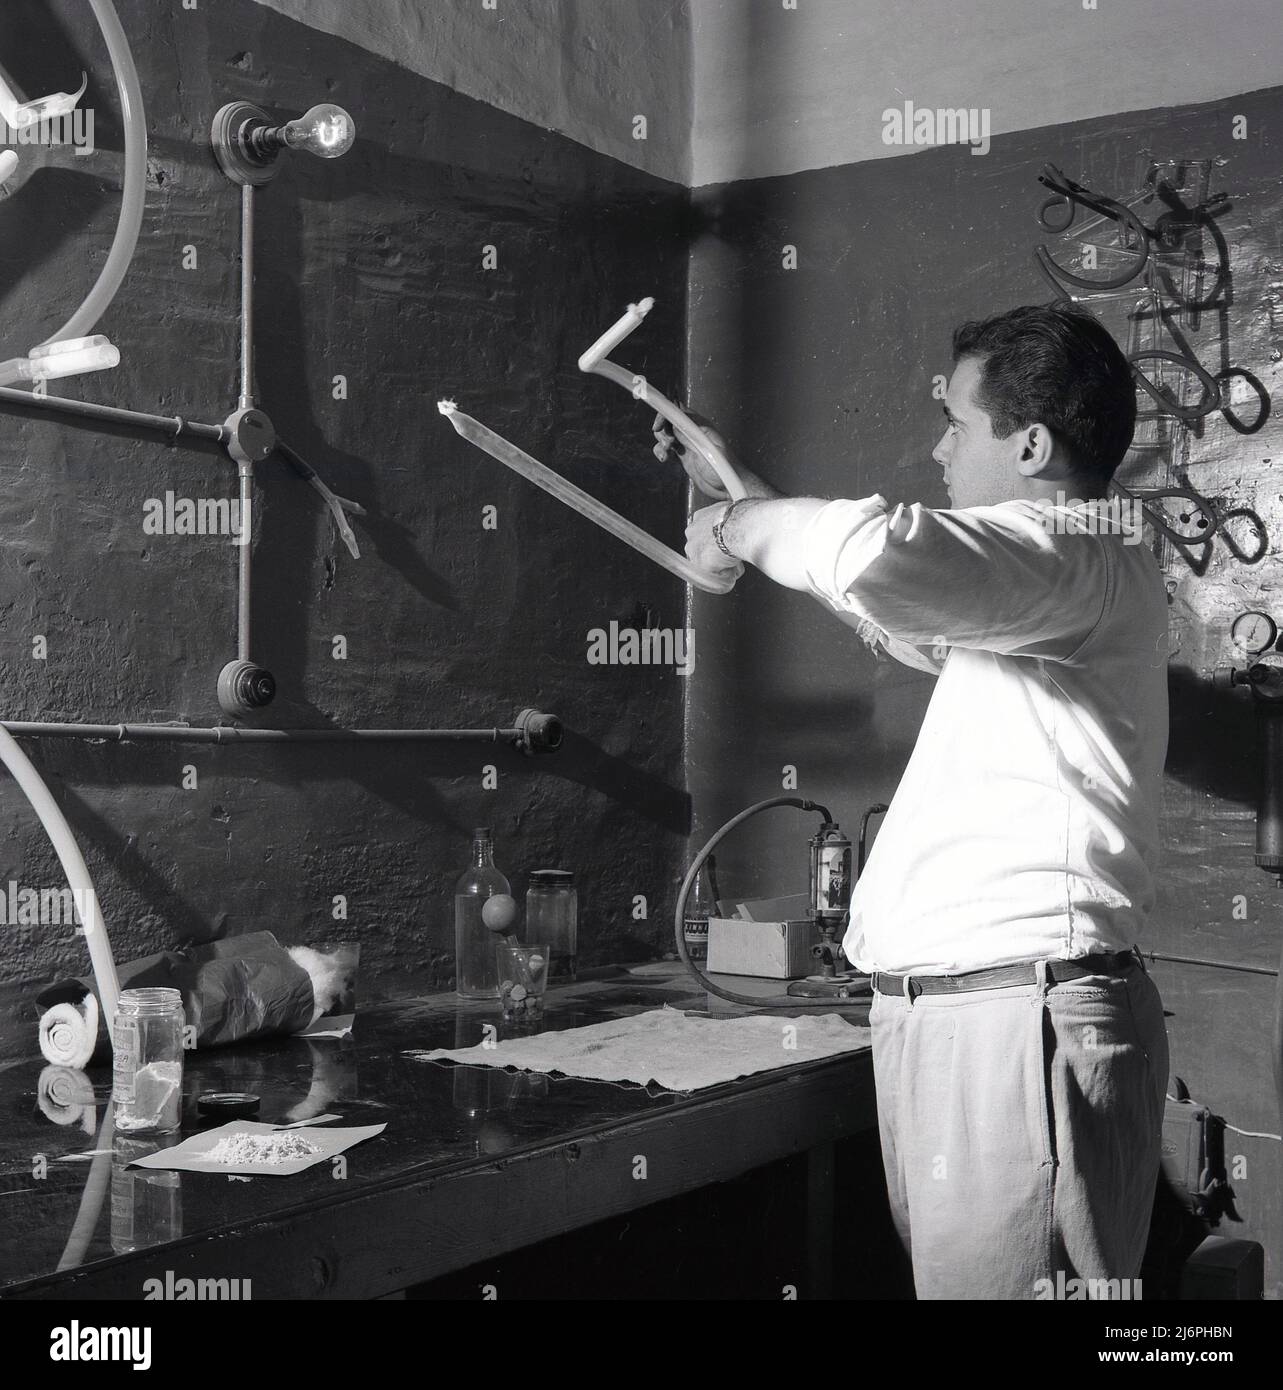 1950s, historical, a man in workshop making neon signs. Made from gas-discharge tubes that contain neon or other gases, these electric signs are produced by a craftsman who can bend glass tubing into shapes and who is known as a glass bender, neon bender or tube bender. The tube is heated into sections using burners. Stock Photo